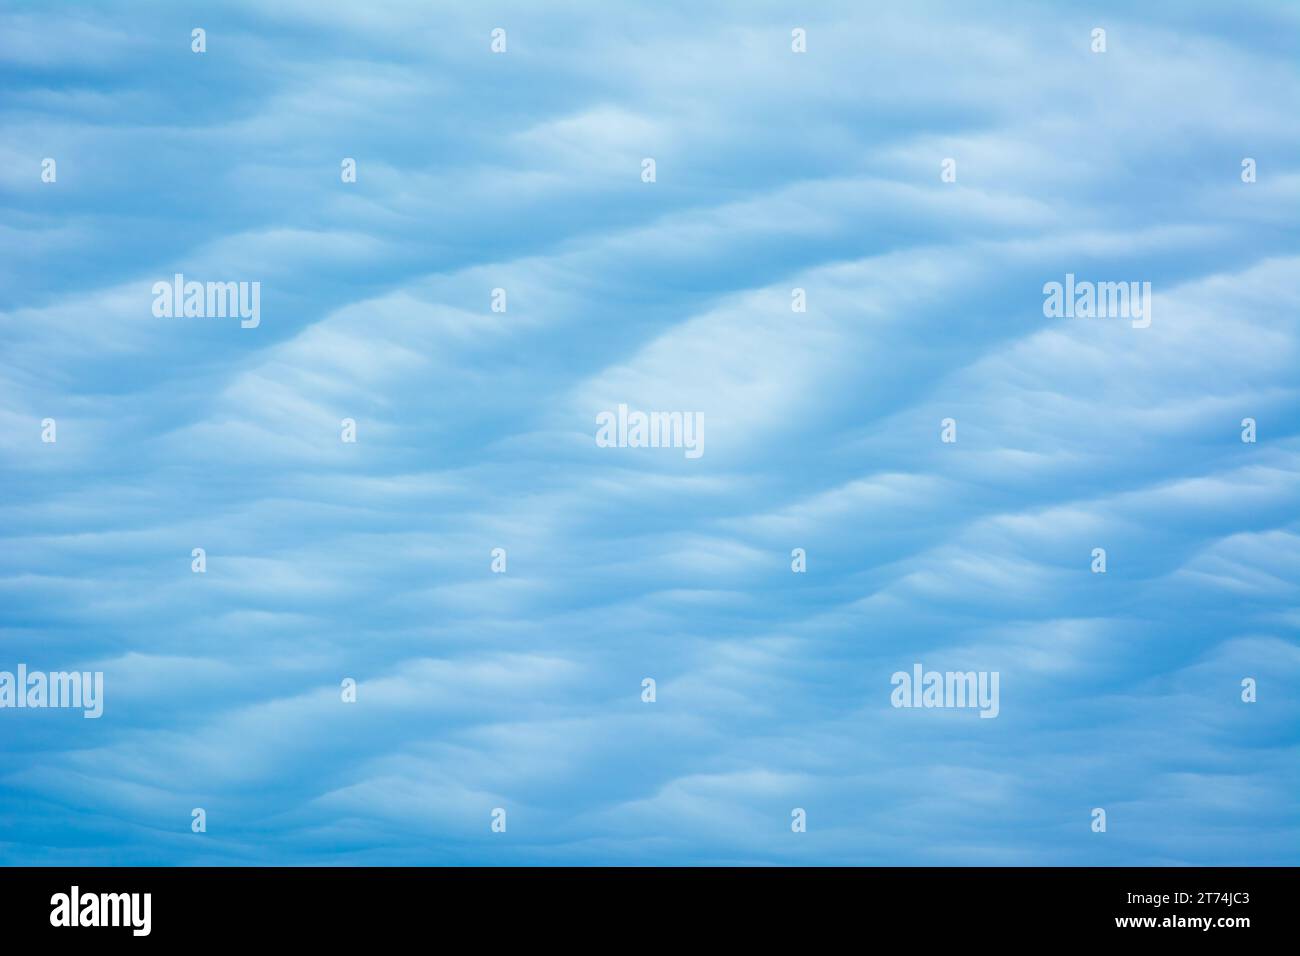 Abstract blue tinted cloud texture with a wavy, dune pattern. Stock Photo